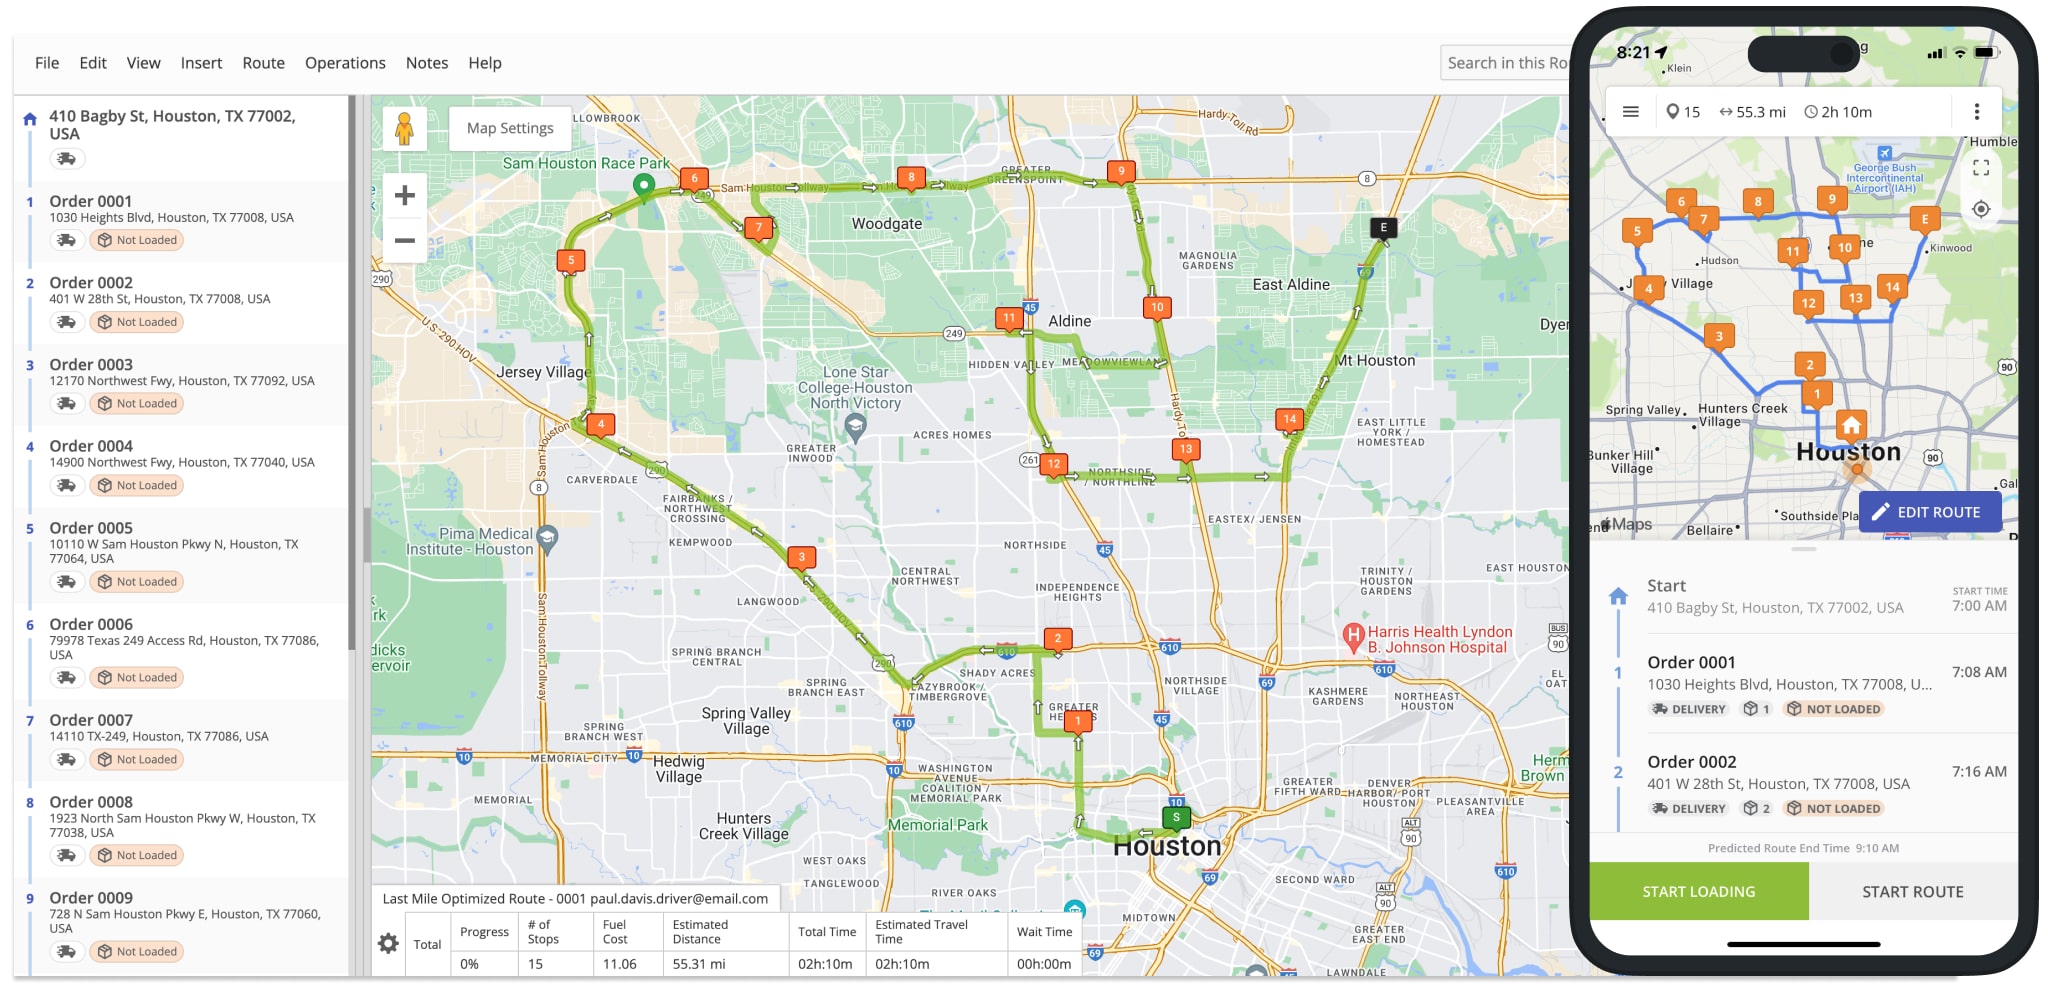 Dispatching Order Groups optimized routes to drivers and field teams using Route4Me's mobile apps.